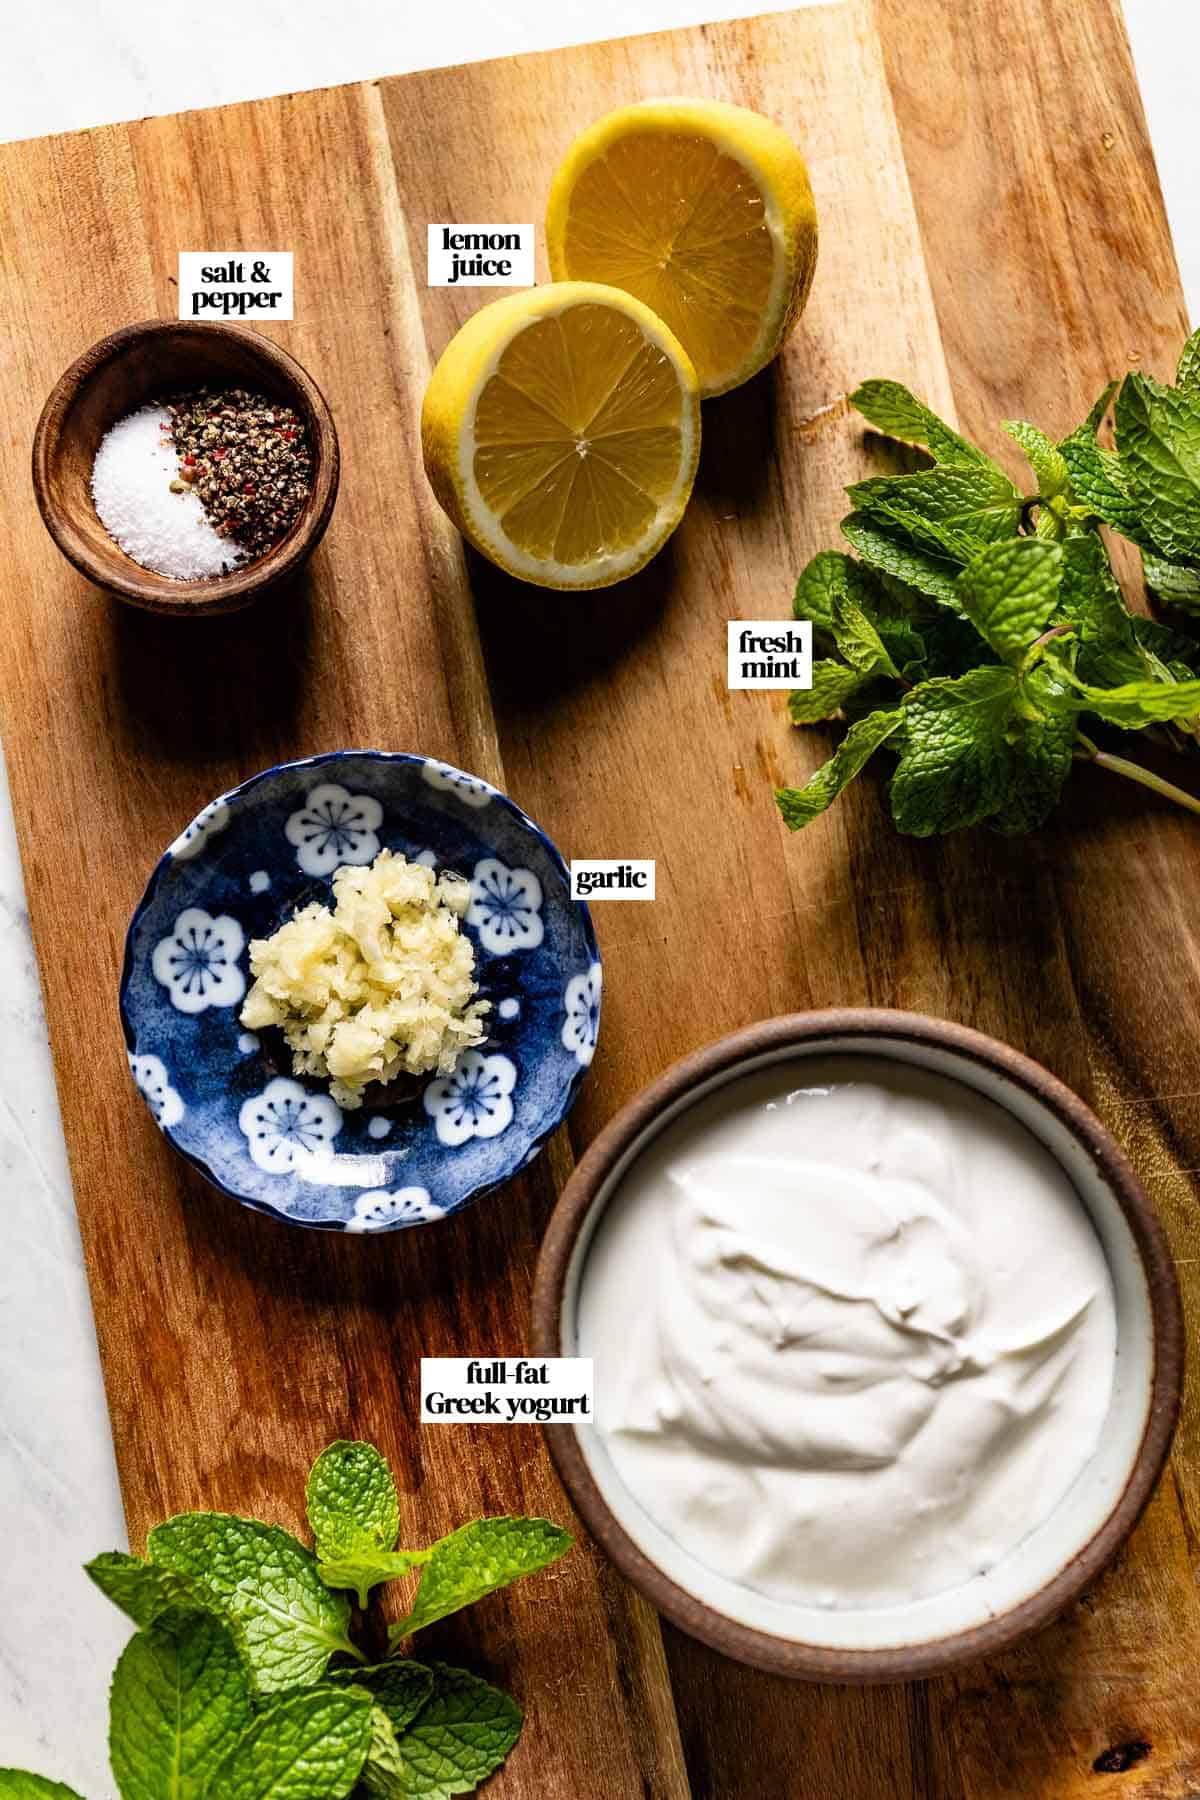 Ingredients for the recipe with text on the image from the top view.